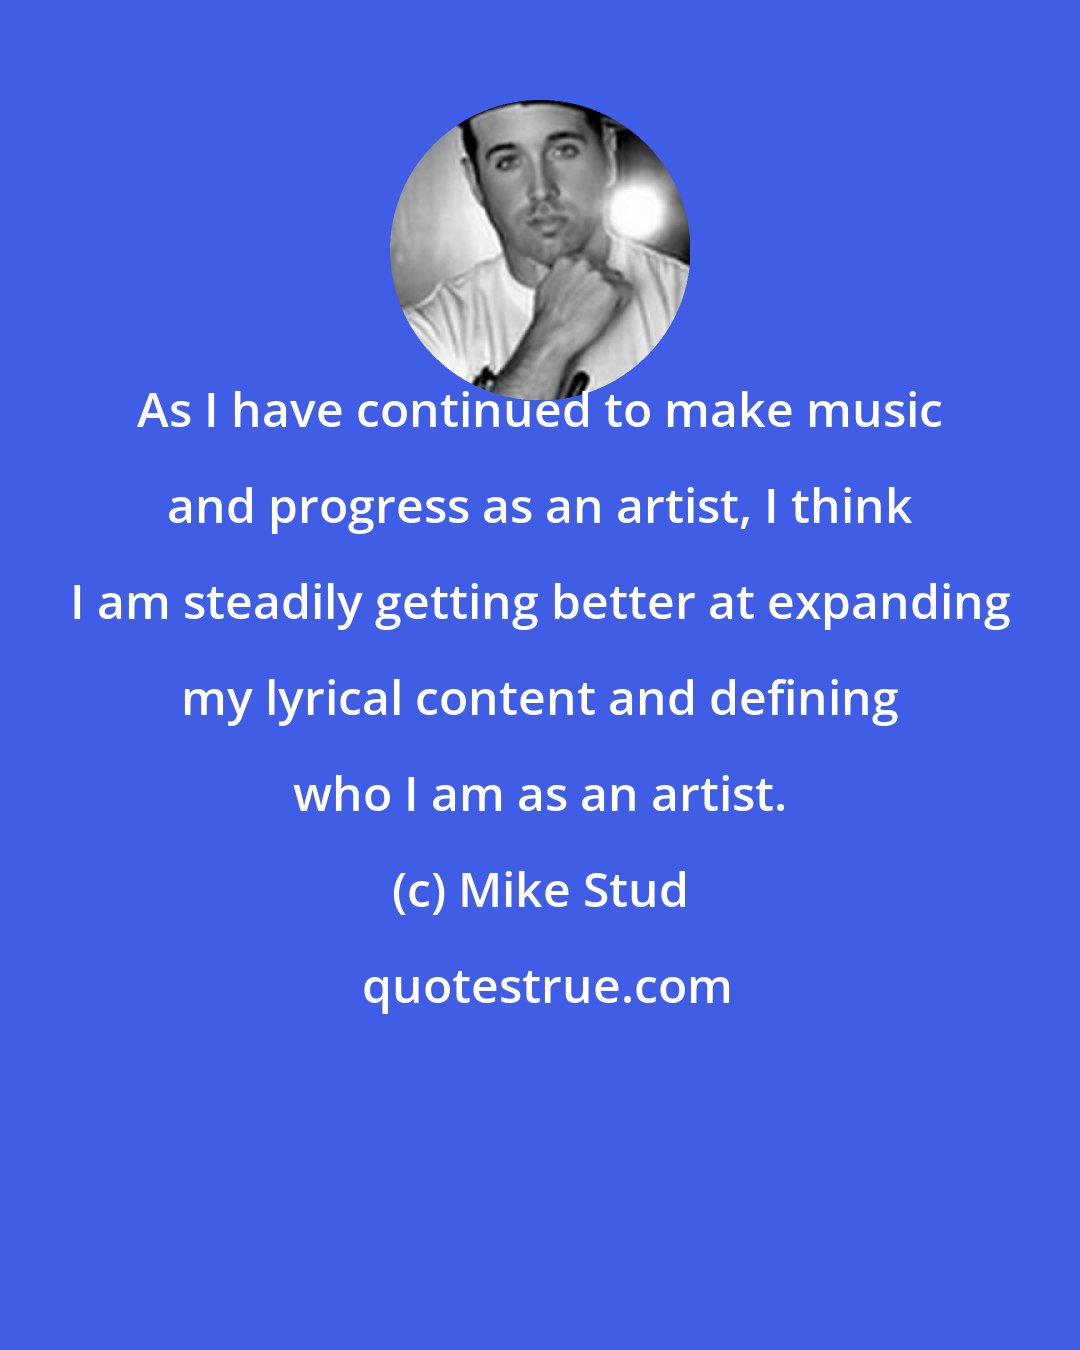 Mike Stud: As I have continued to make music and progress as an artist, I think I am steadily getting better at expanding my lyrical content and defining who I am as an artist.